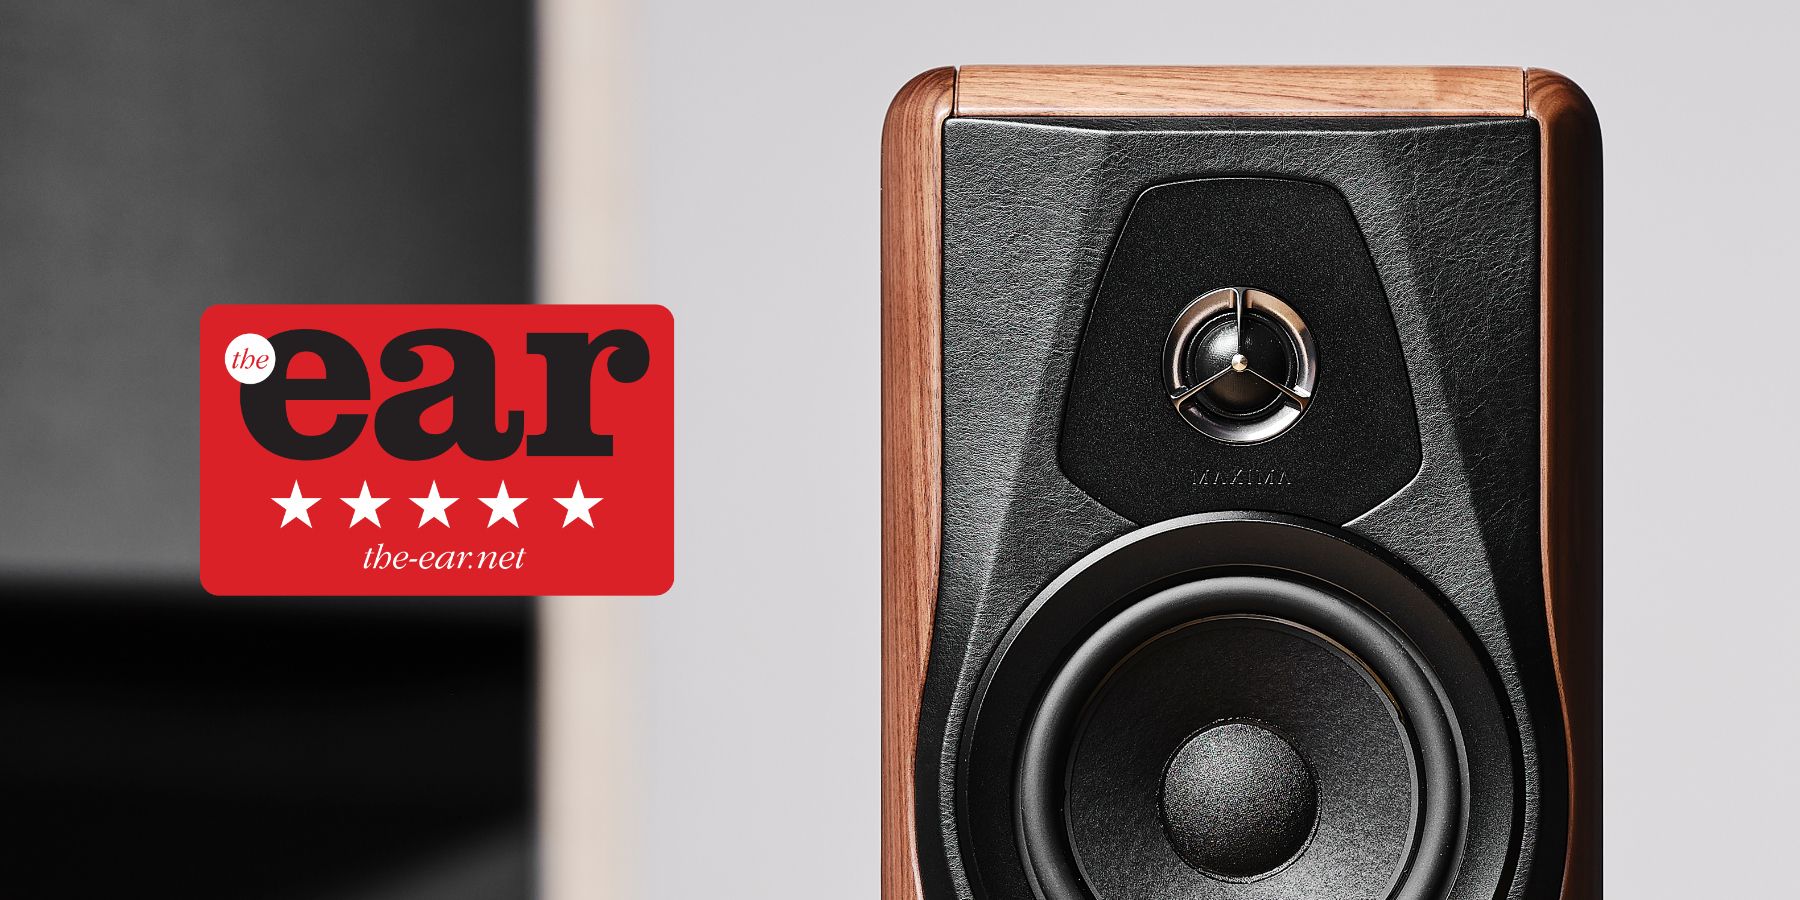 Sonus faber's Maxima Amator speaker gets a 5-star review from 'the ear'